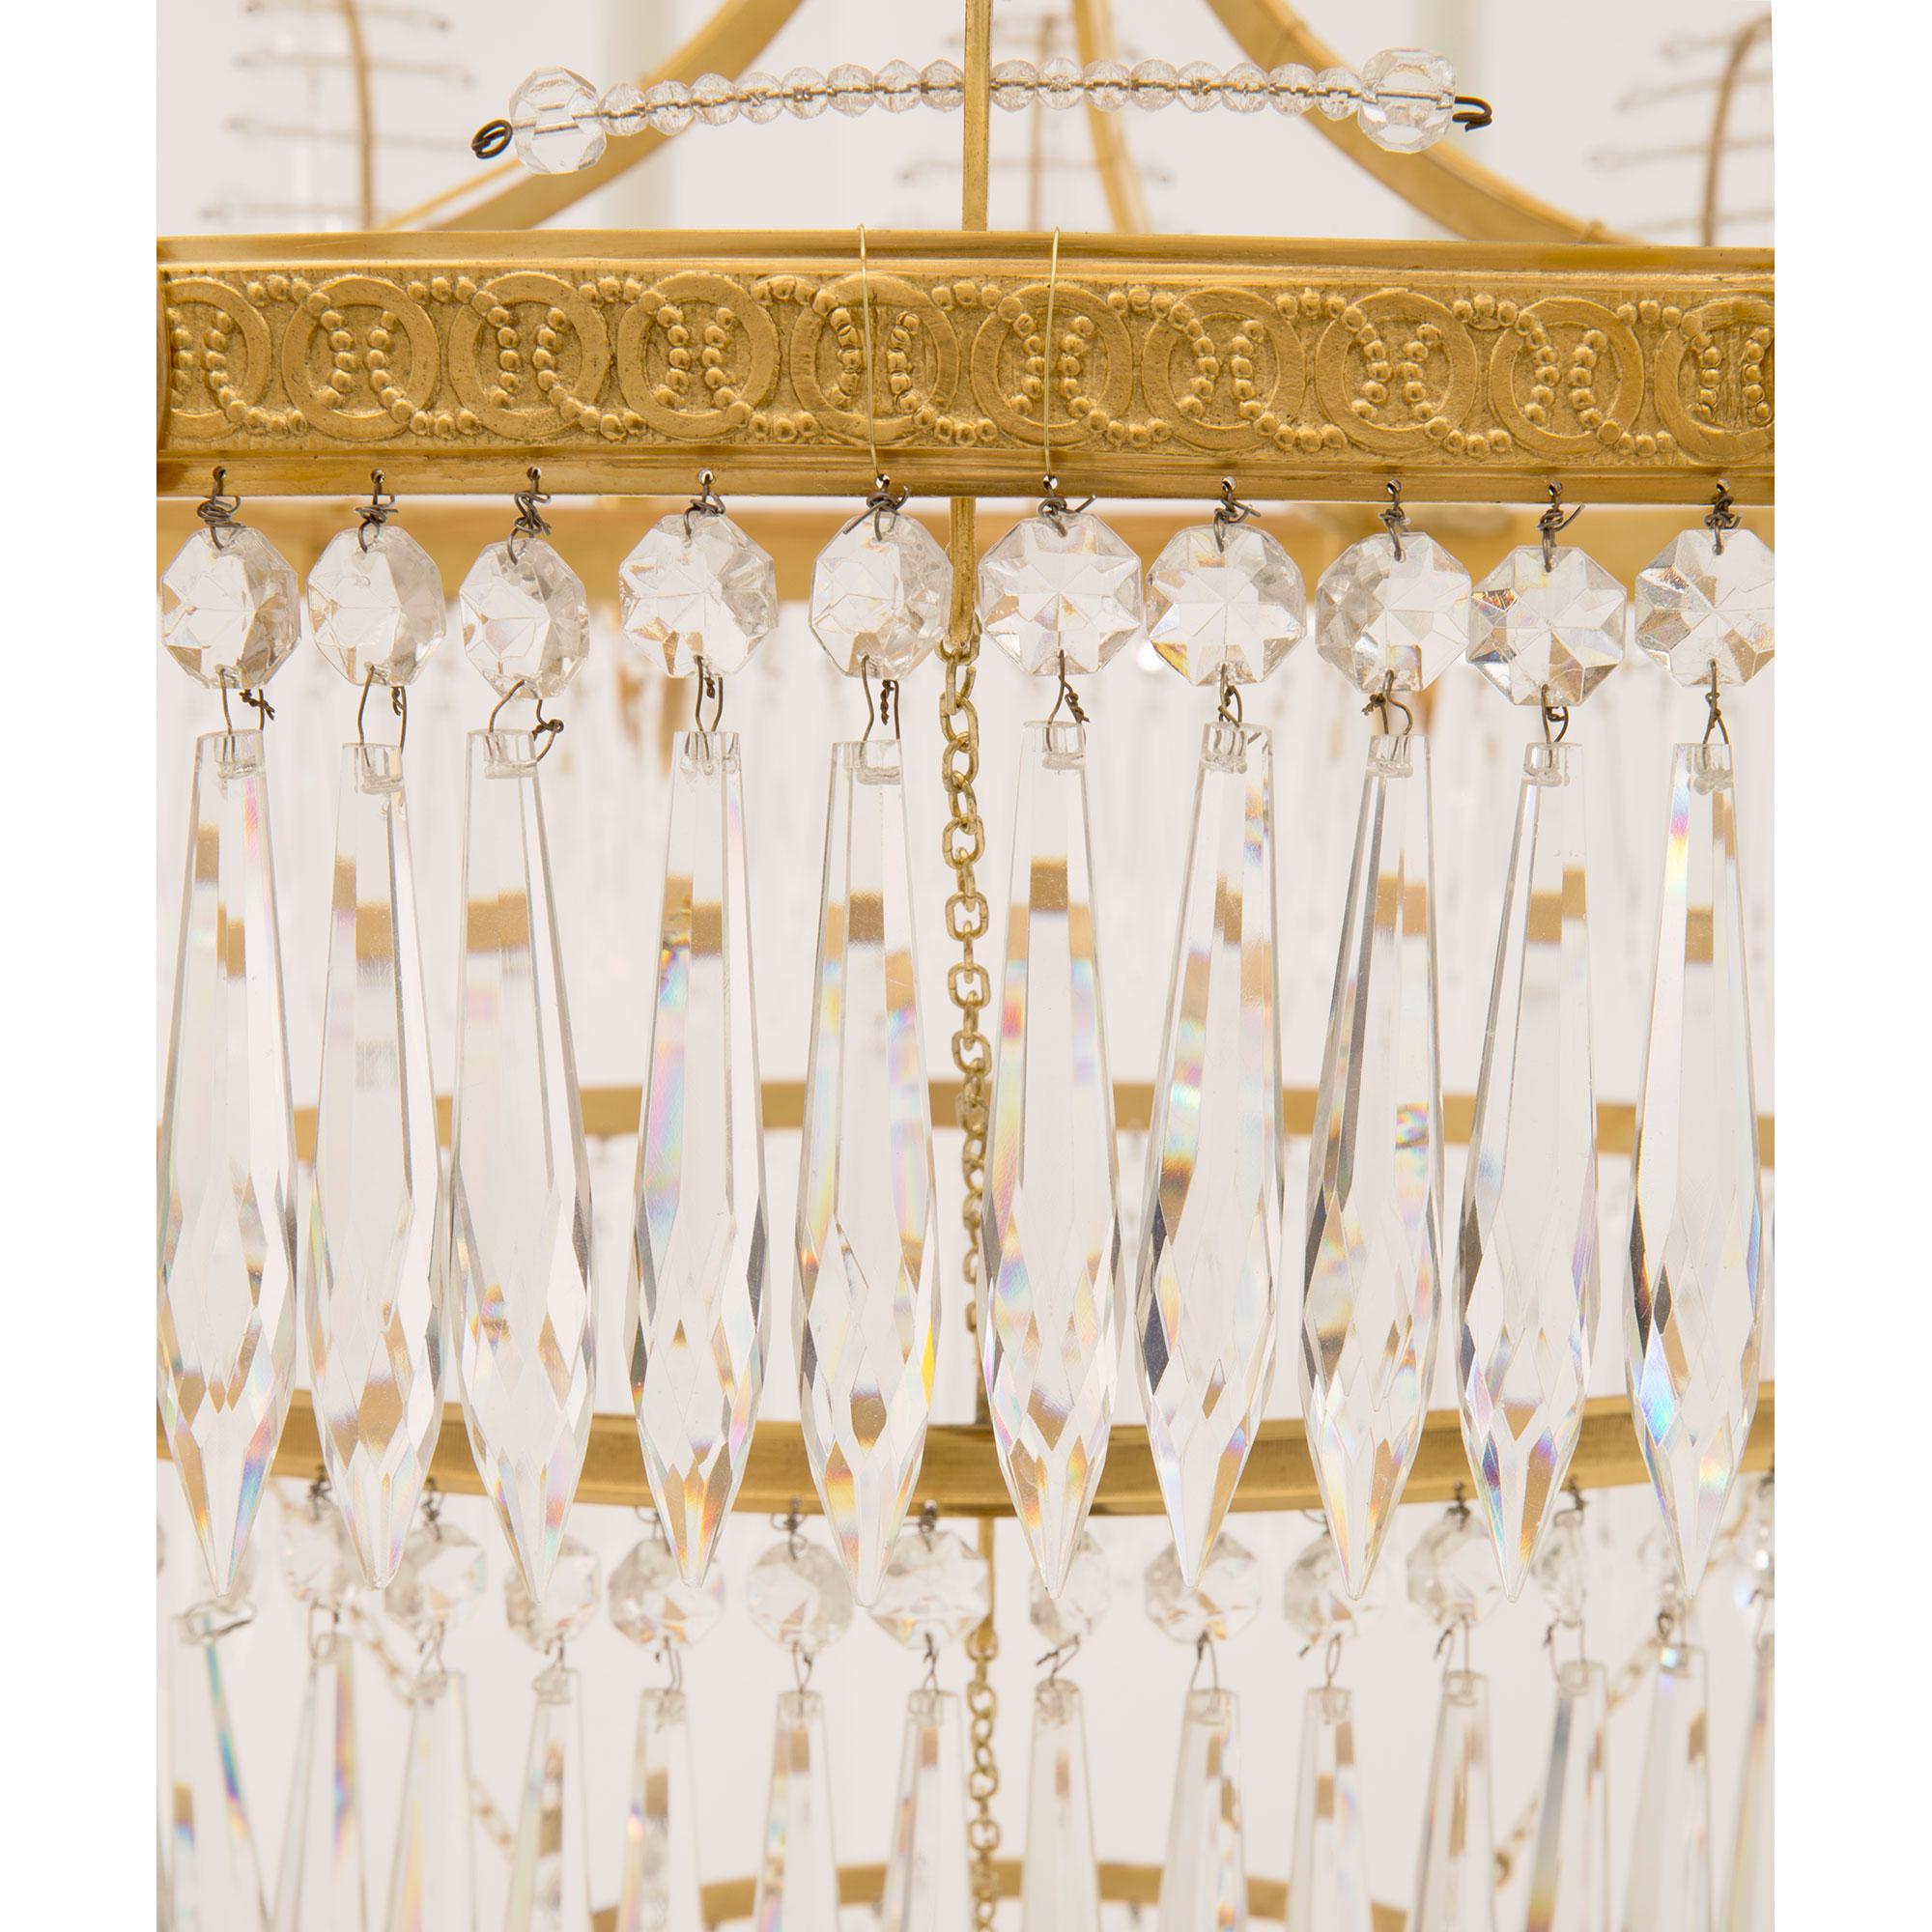 Russian Early 19th Century Neoclassical Style Ormolu and Crystal Chandelier For Sale 4